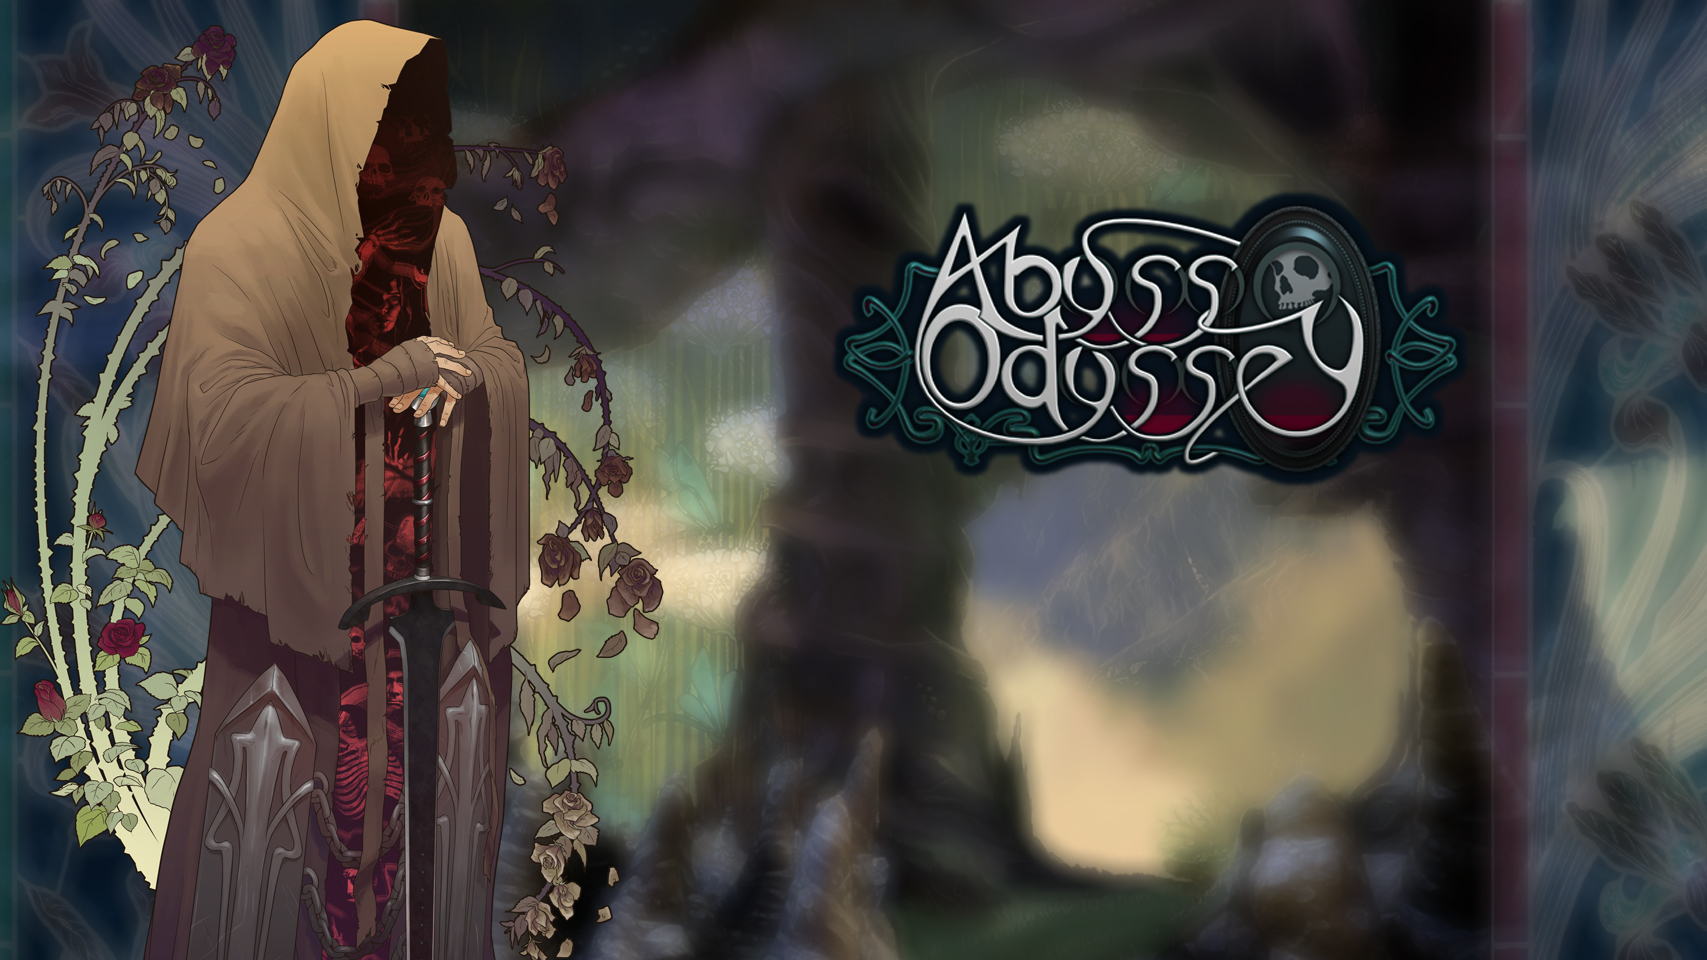 ABYSS ODESSEY (2014)